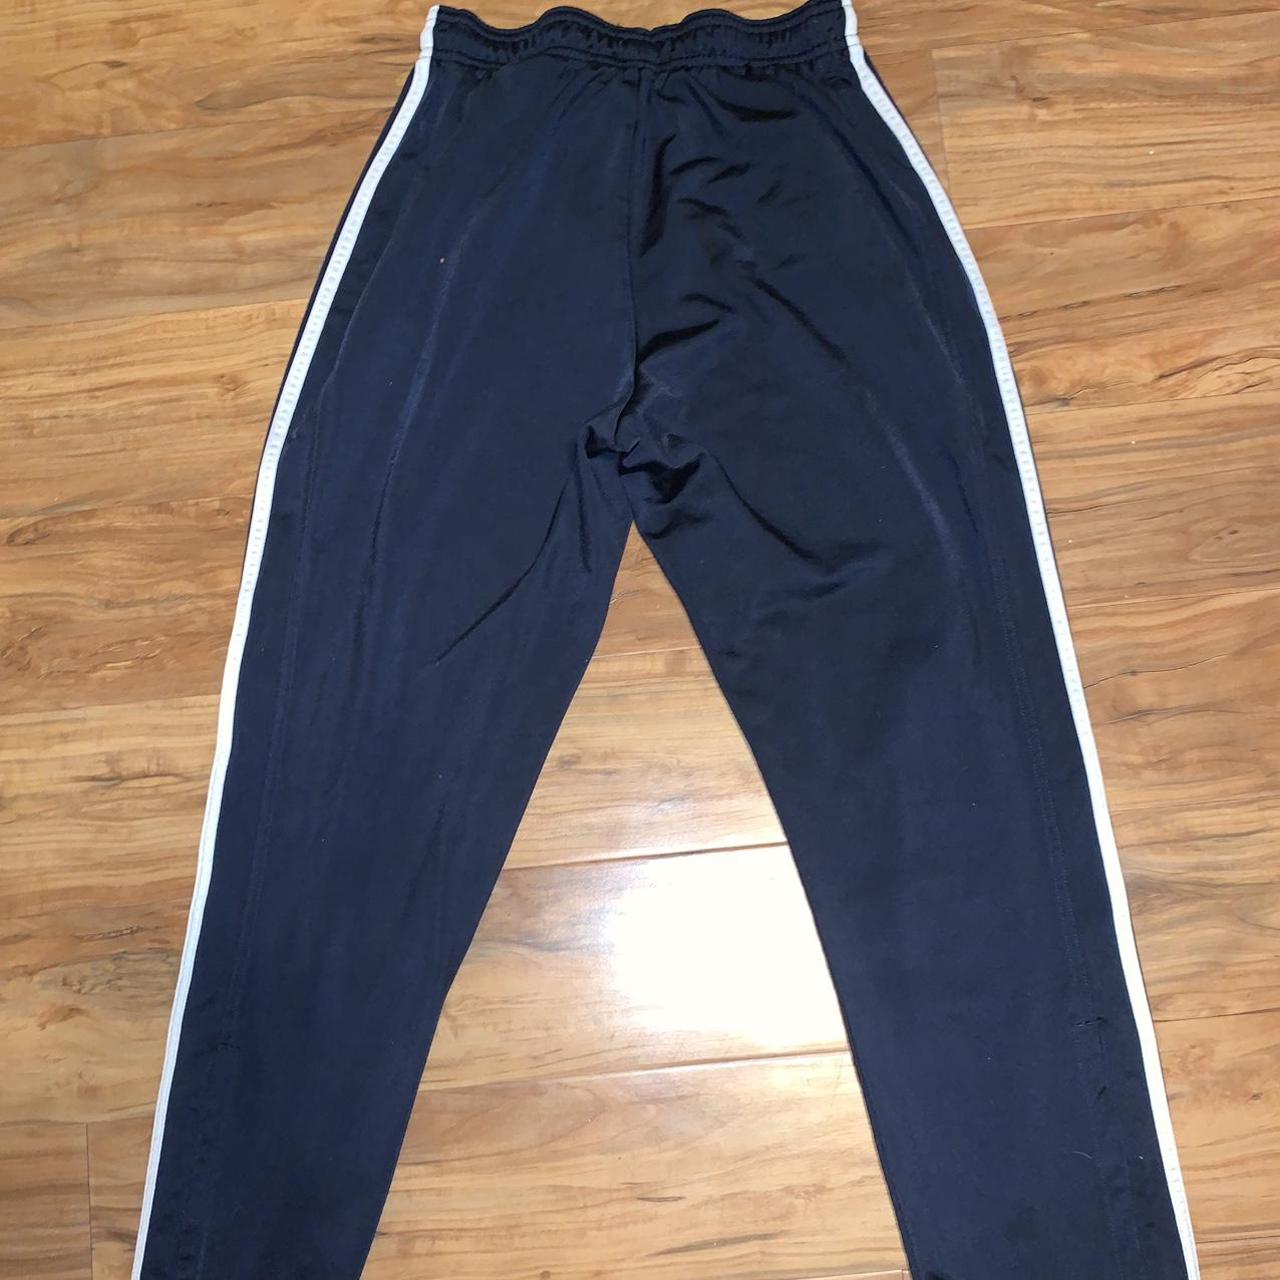 Adidas Men's Navy and White Joggers-tracksuits (3)